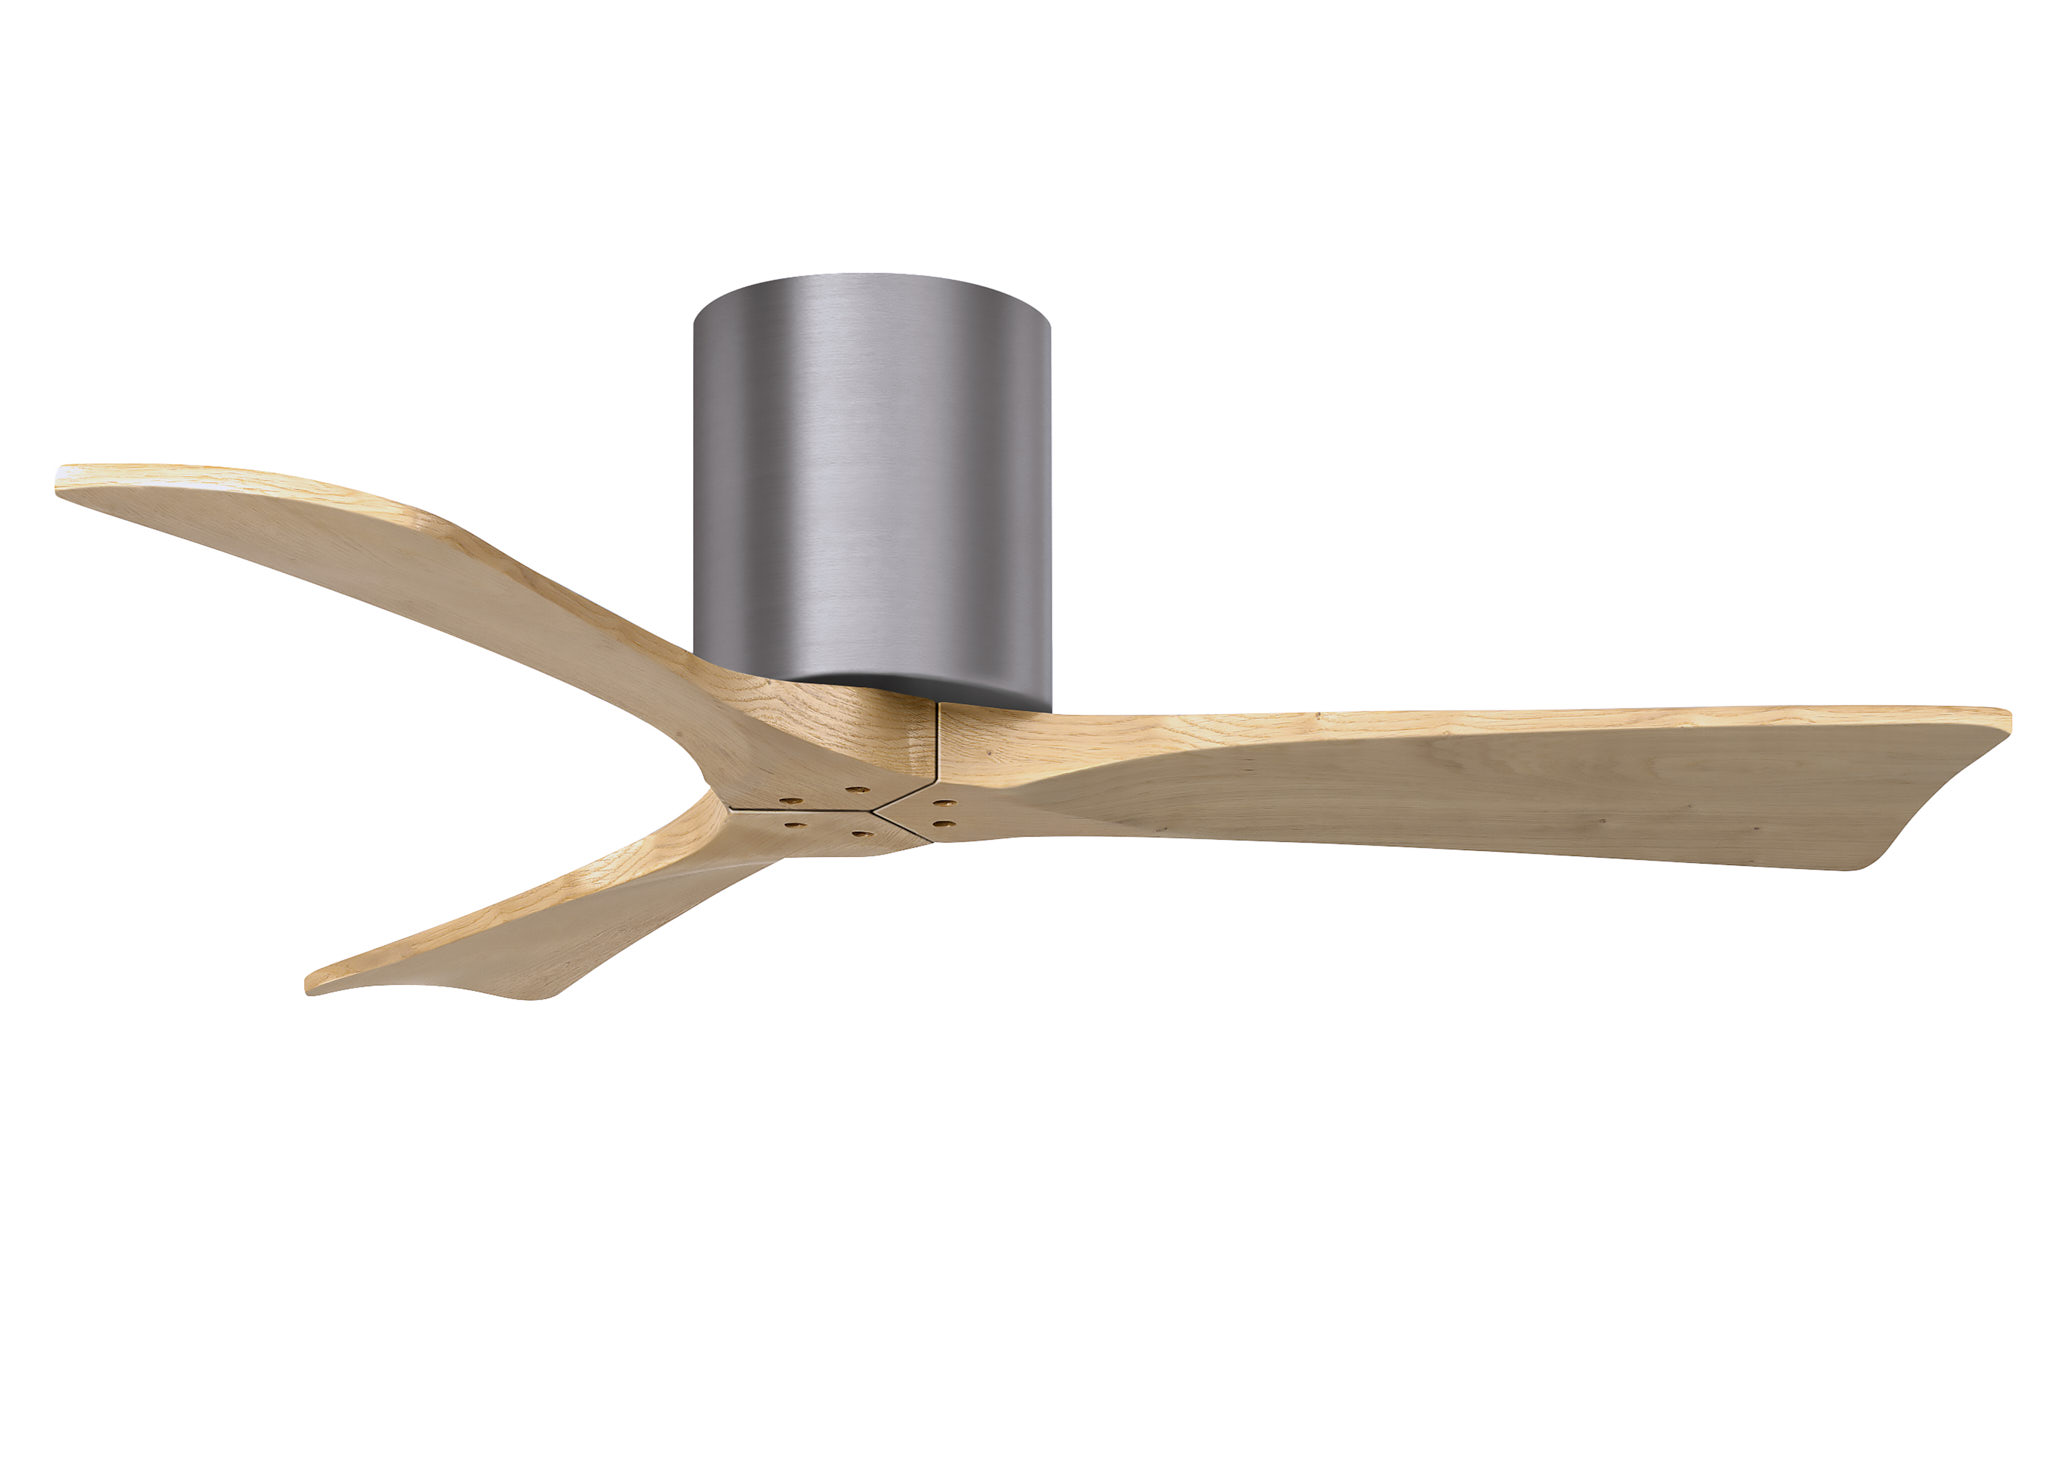 Irene-3H 6-speed ceiling fan in brushed pewter finish with 42